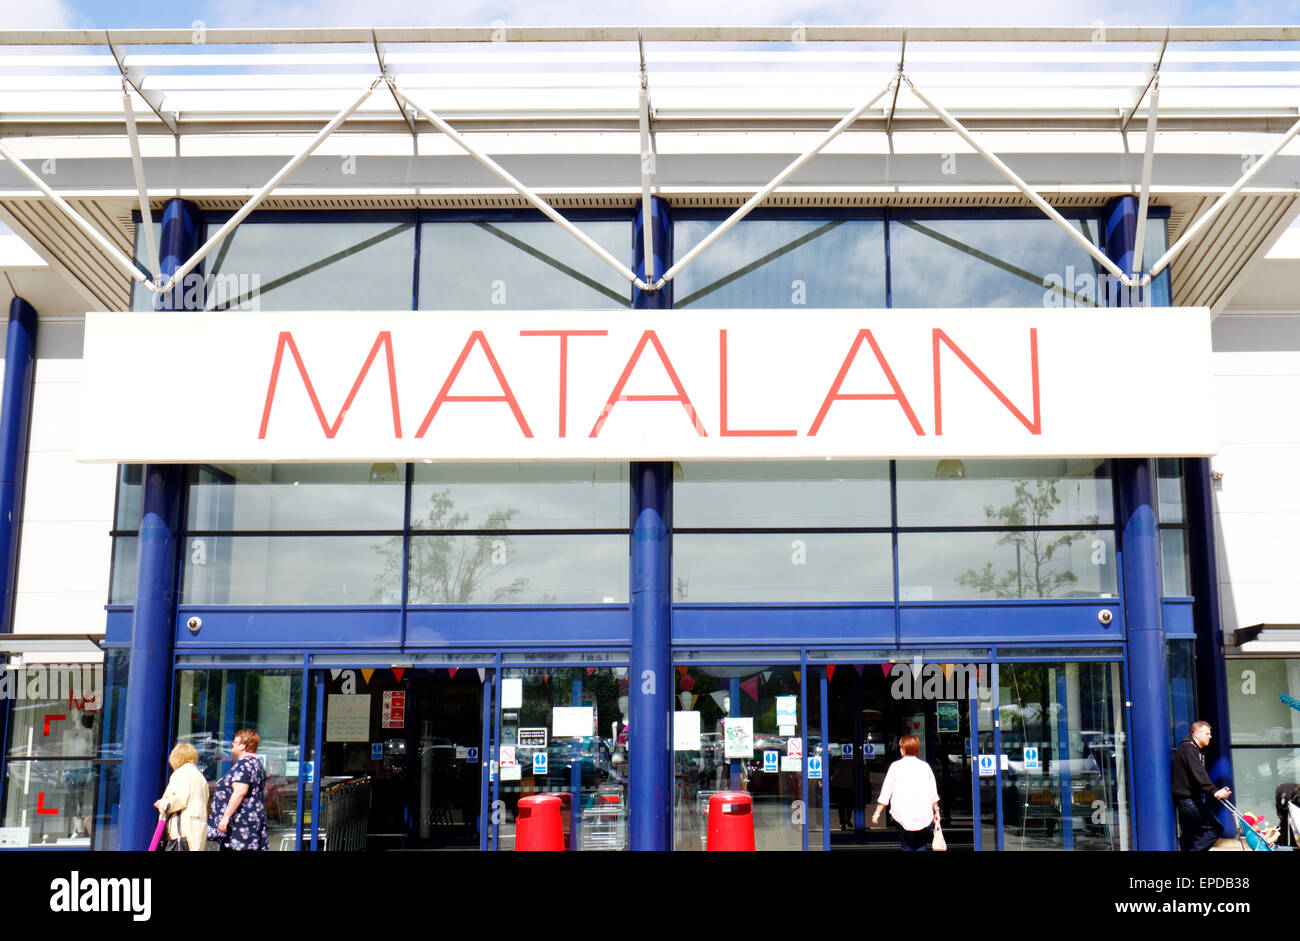 A Matalan shop front and sign at the Riverside centre in Norwich, Norfolk, England, United Kingdom. Stock Photo